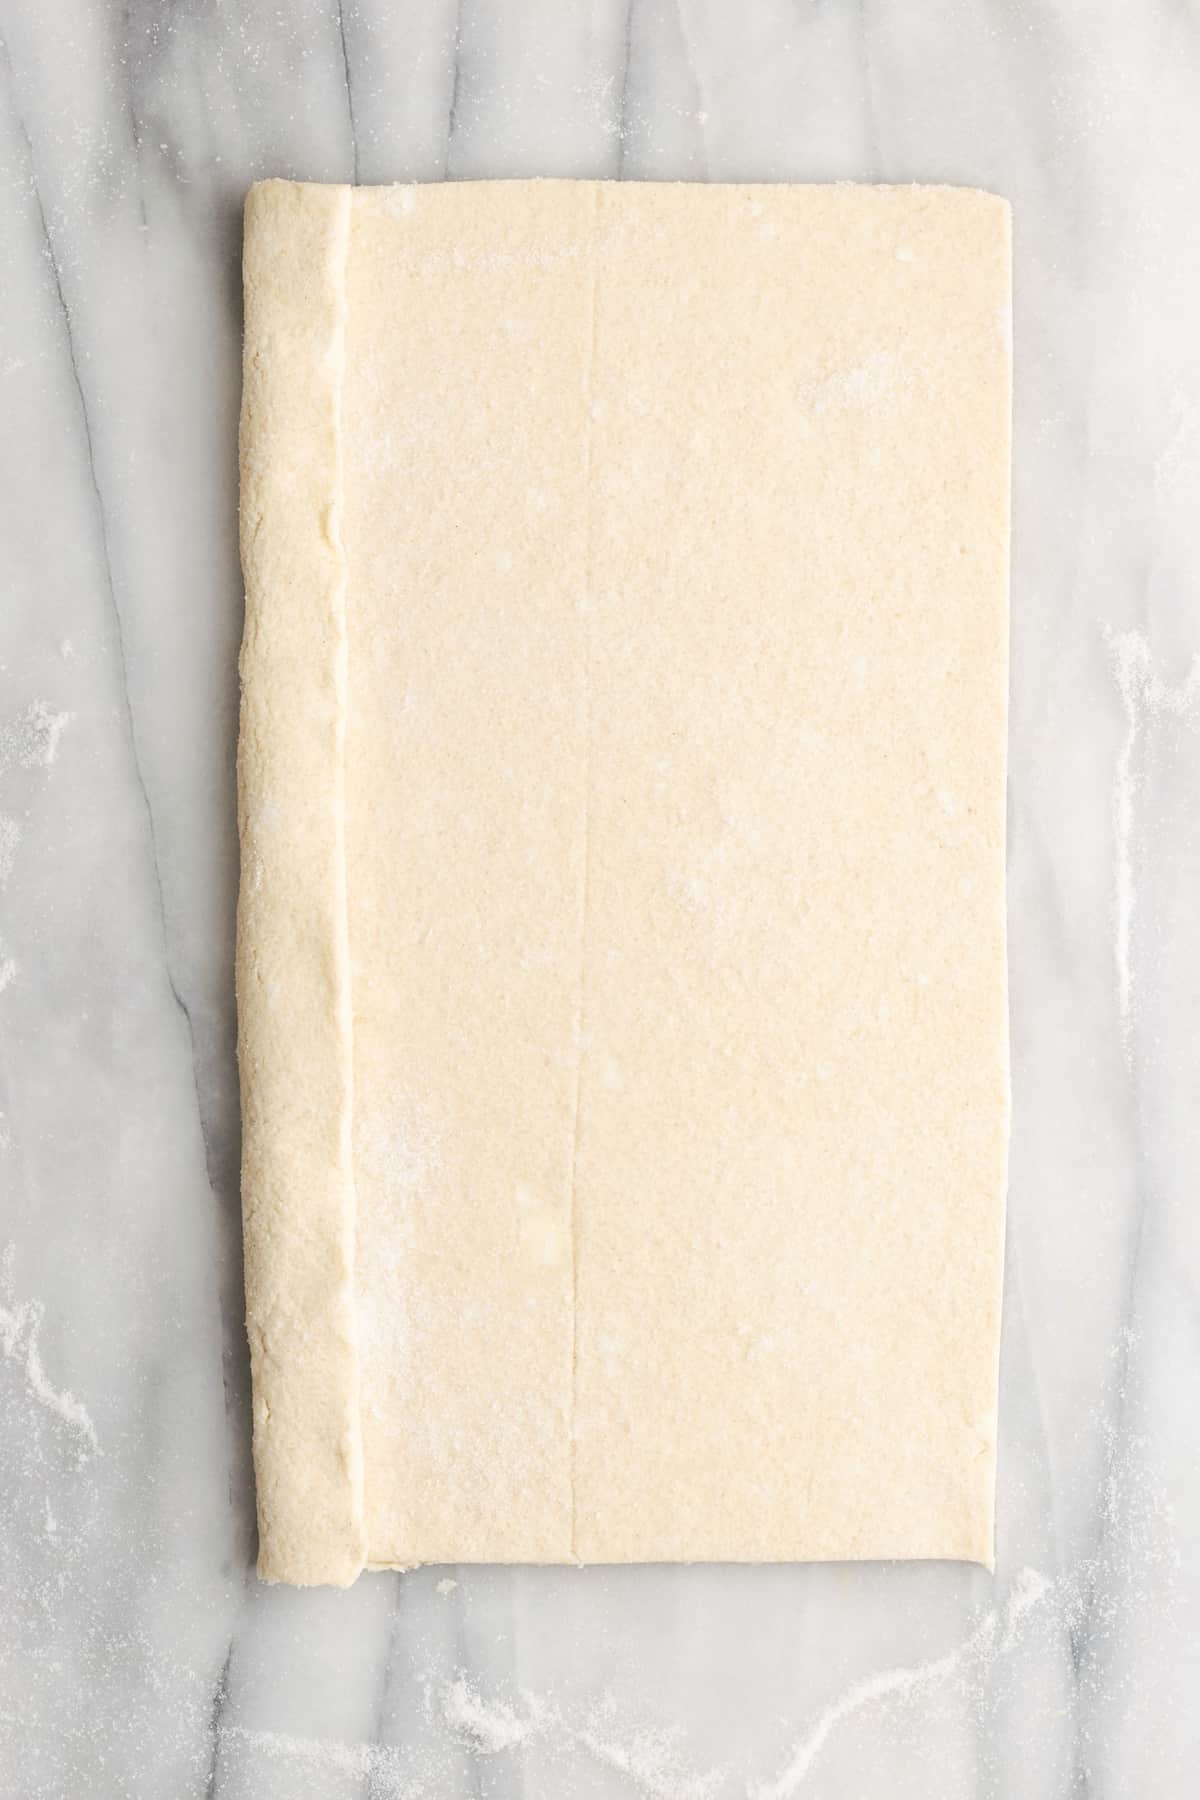 A rectangle of puff pastry dough with one side folded in about a quarter of the way